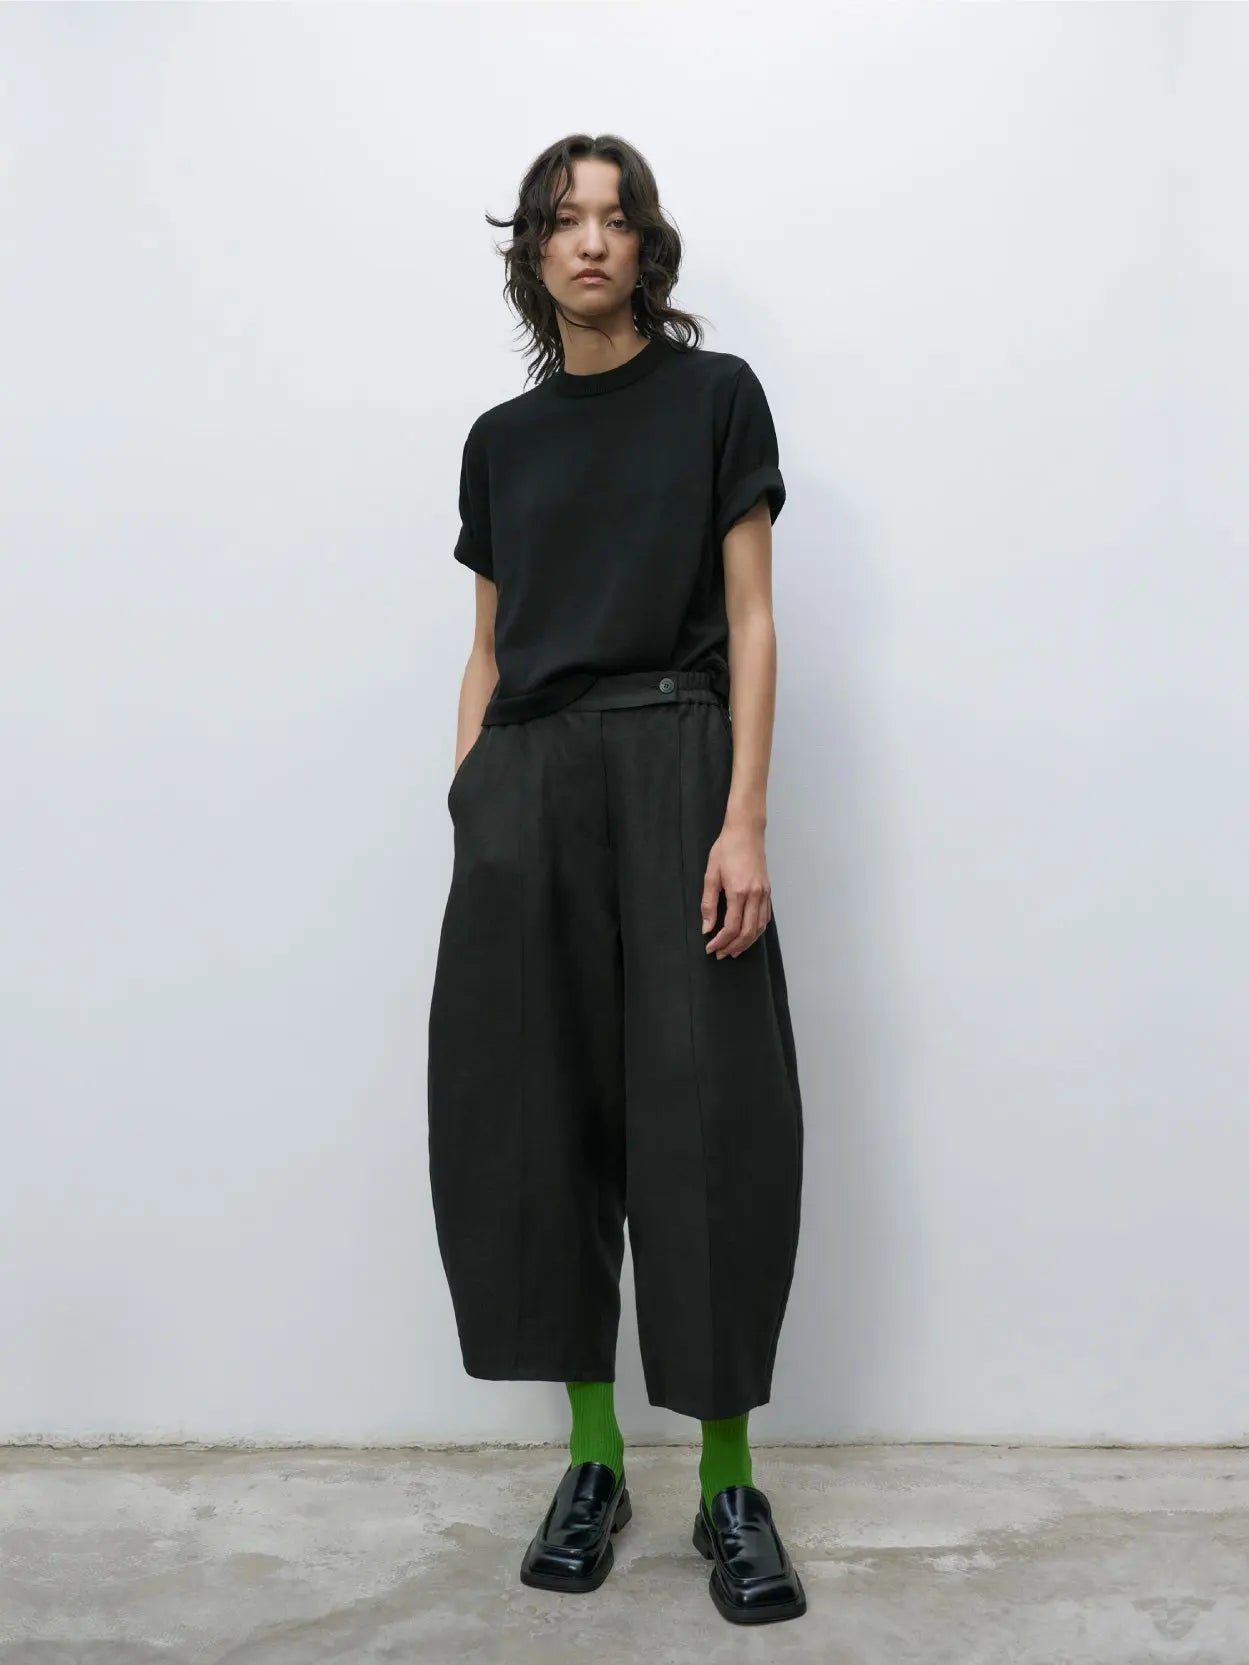 A pair of black, wide-leg trousers with an elastic waistband and a single button closure. The trousers have a clean, minimalist design with visible front pleats running from the waistband to the hem. The fabric appears to be smooth and slightly structured, available exclusively at our Barcelona store. These are the Linen Curved Pants Black by Cordera.